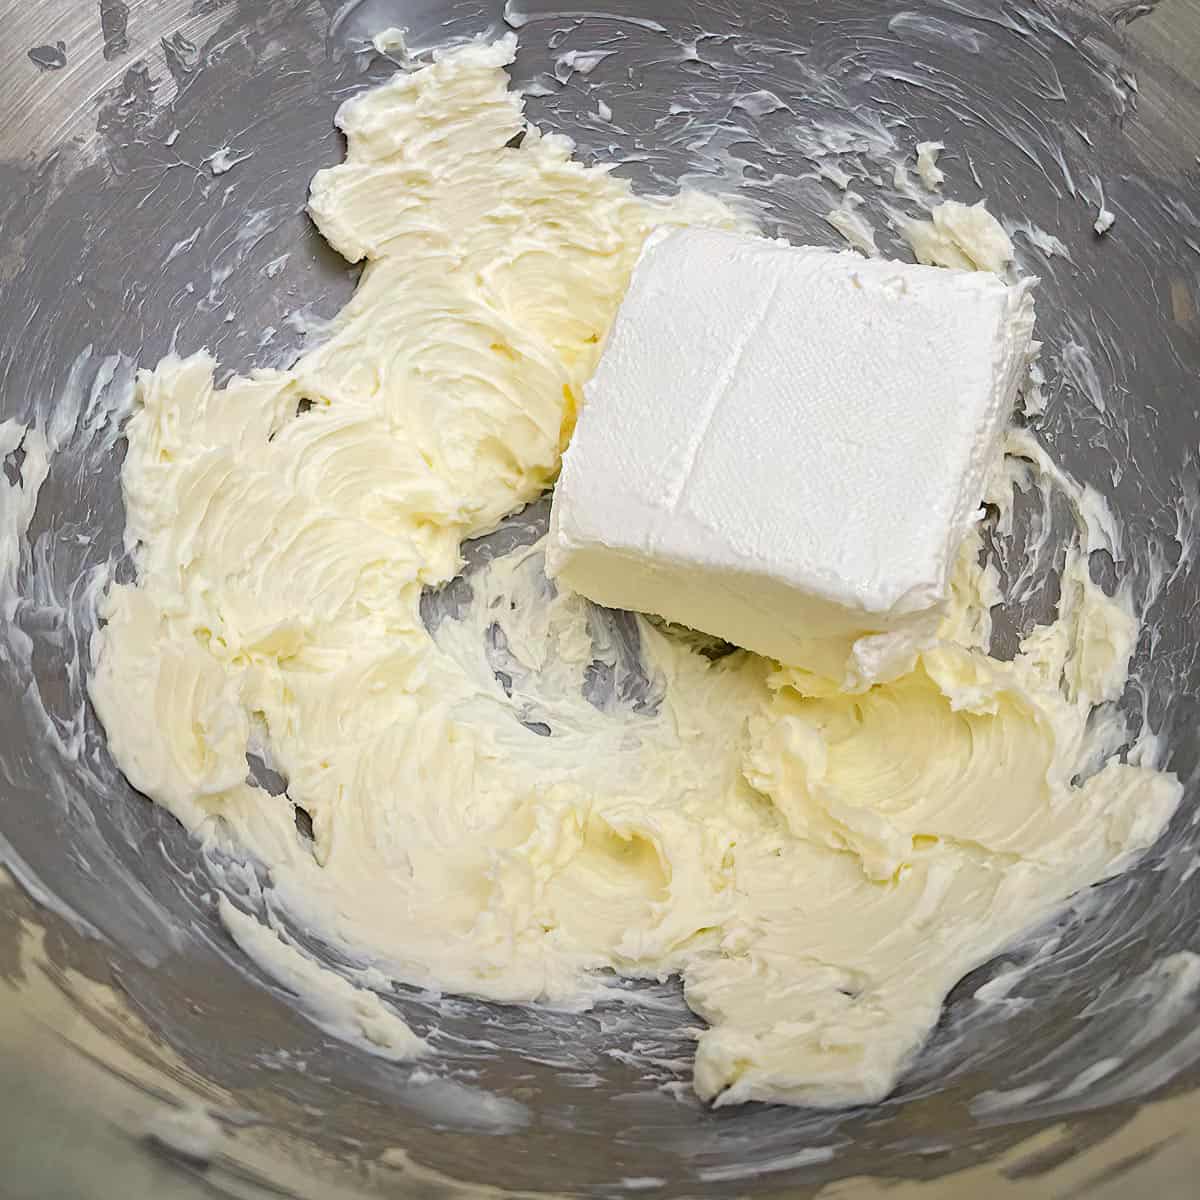 Mixing the butter before adding the cream cheese.